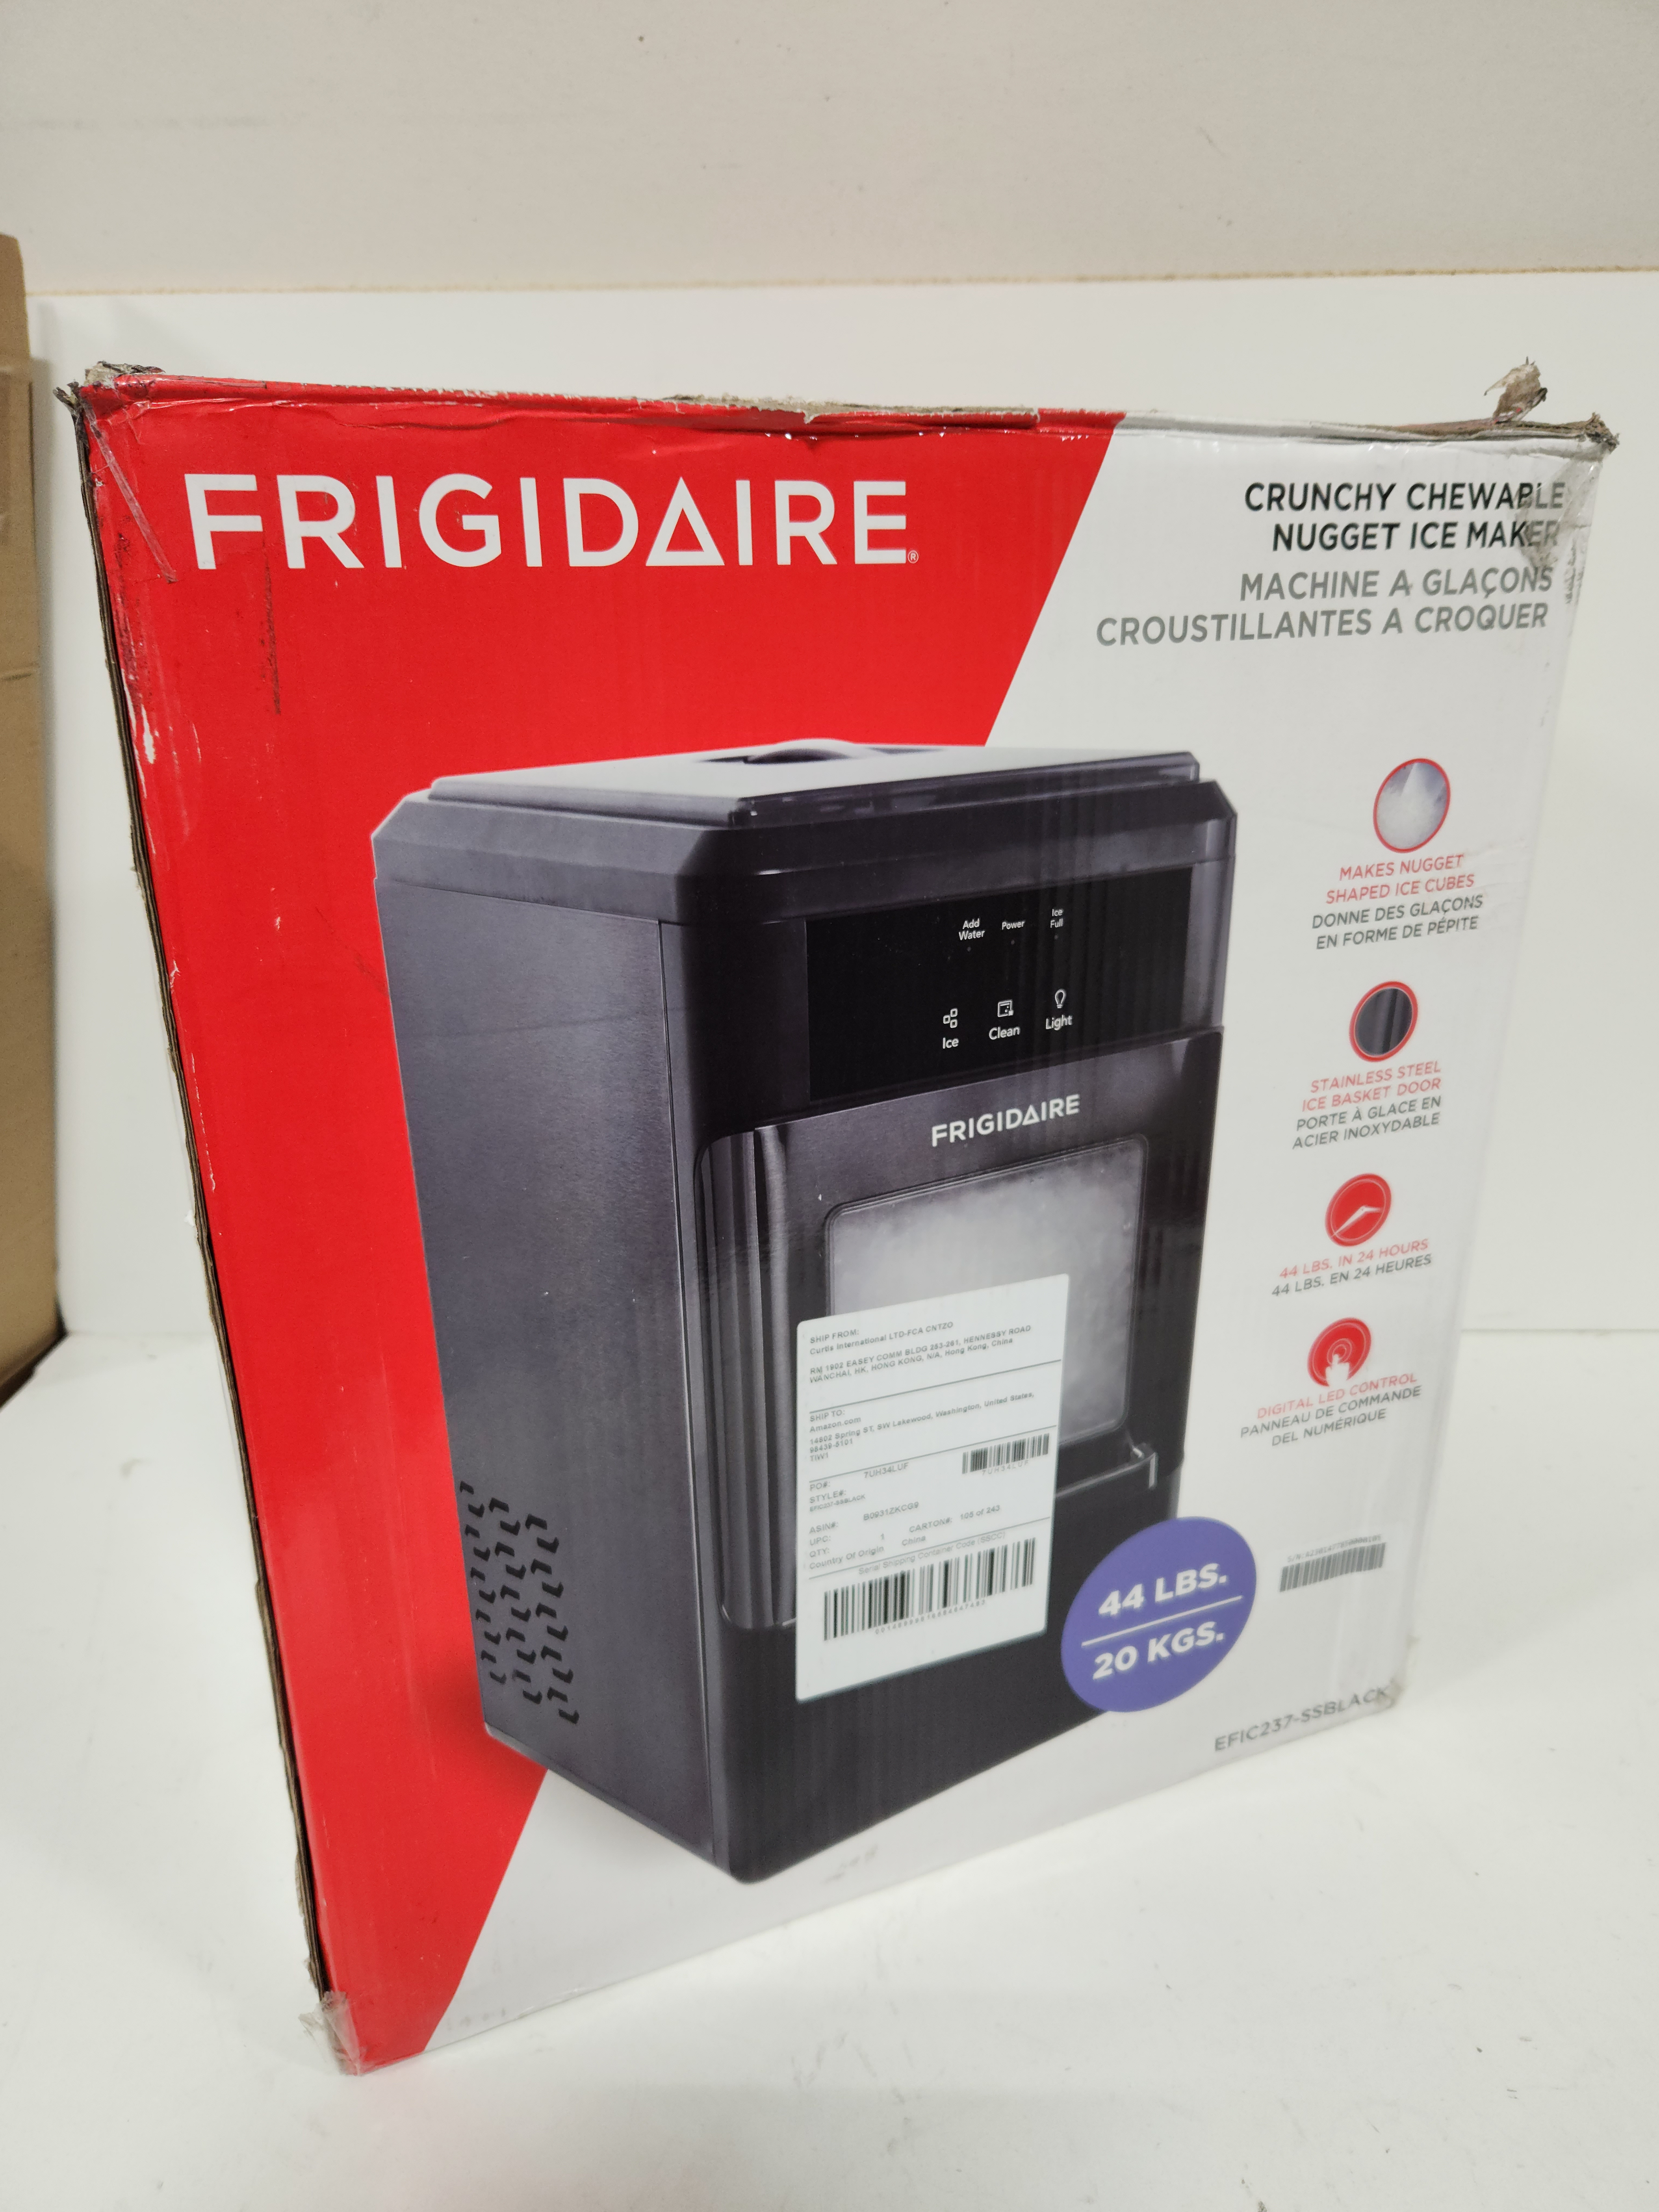 Frigidaire EFIC237 Countertop Crunchy Chewable Nugget Ice Maker